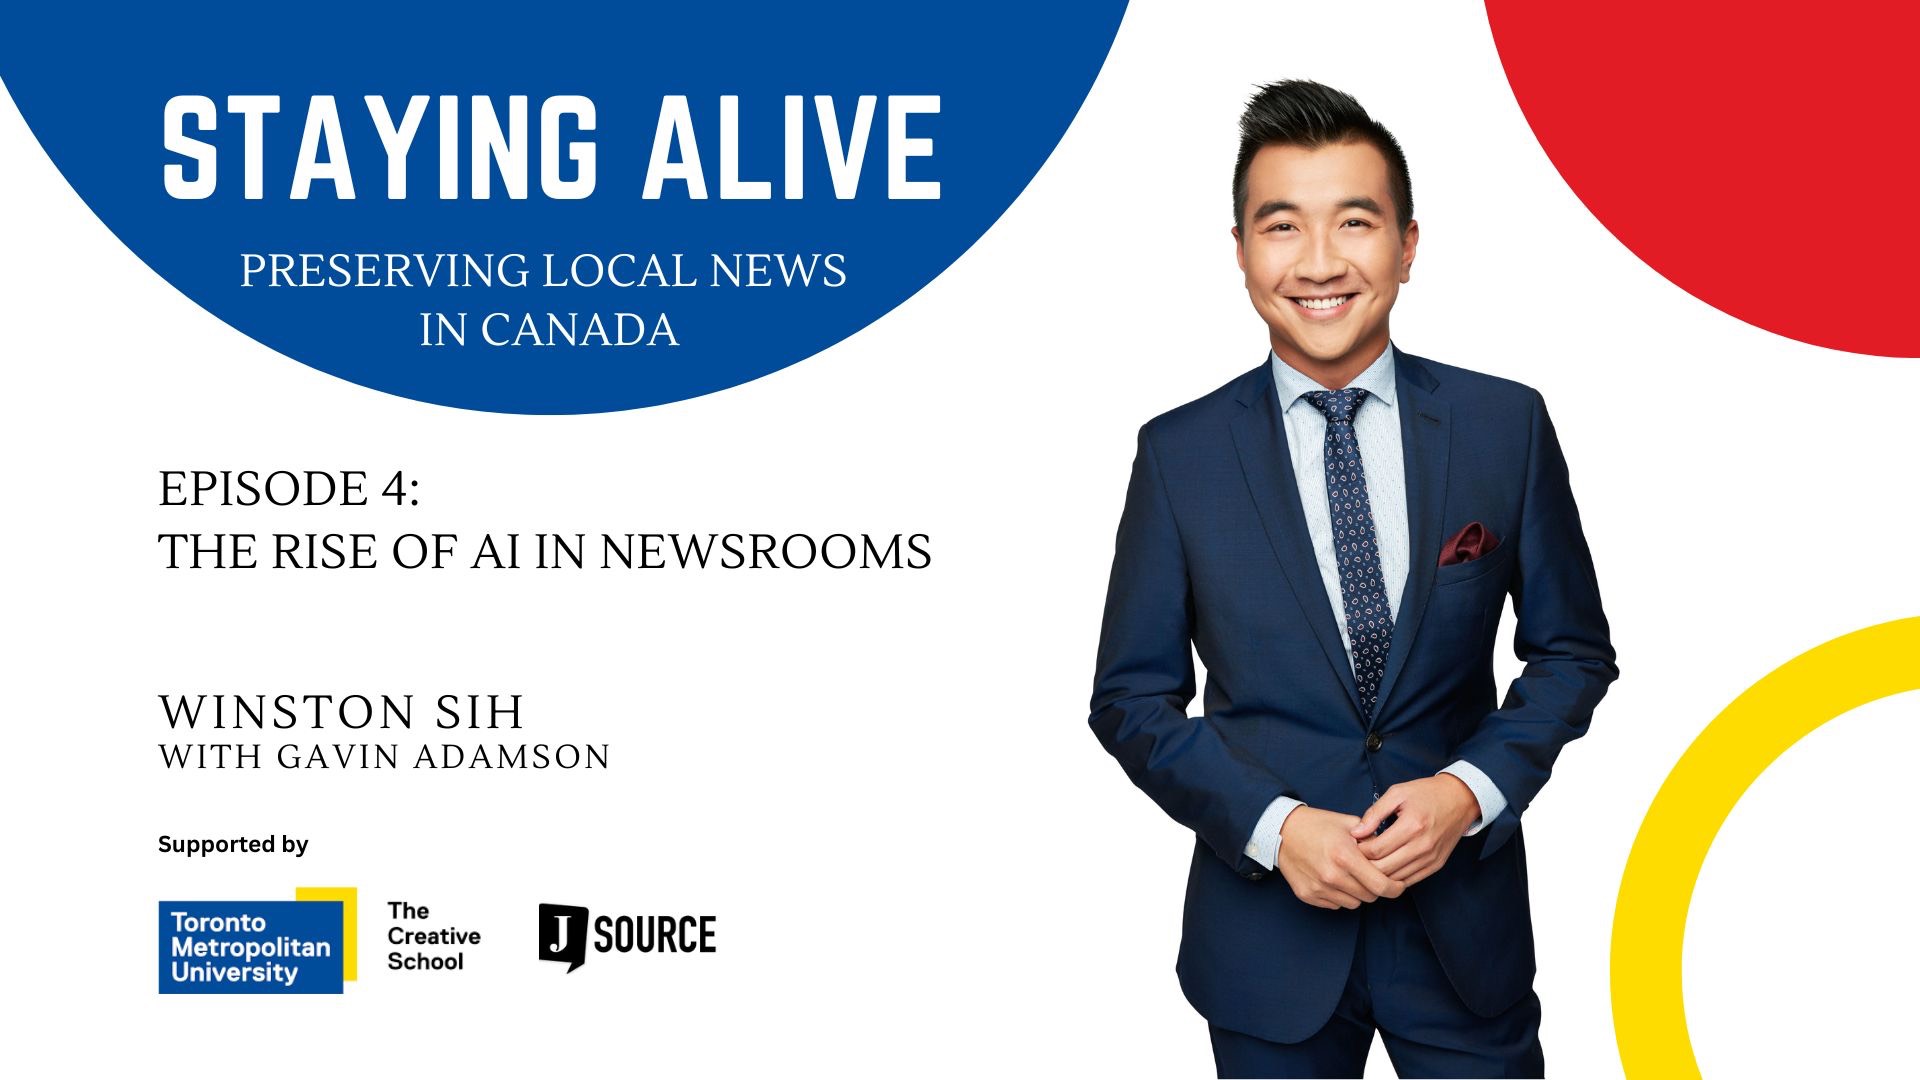 Staying Alive Preserving Local News in Canada
Episode 4
The Rise of AI in Newsrooms 
Winston Sih with Gavin Adamson Supported by the Creative School at Toronto Metropolitan University and J-Source